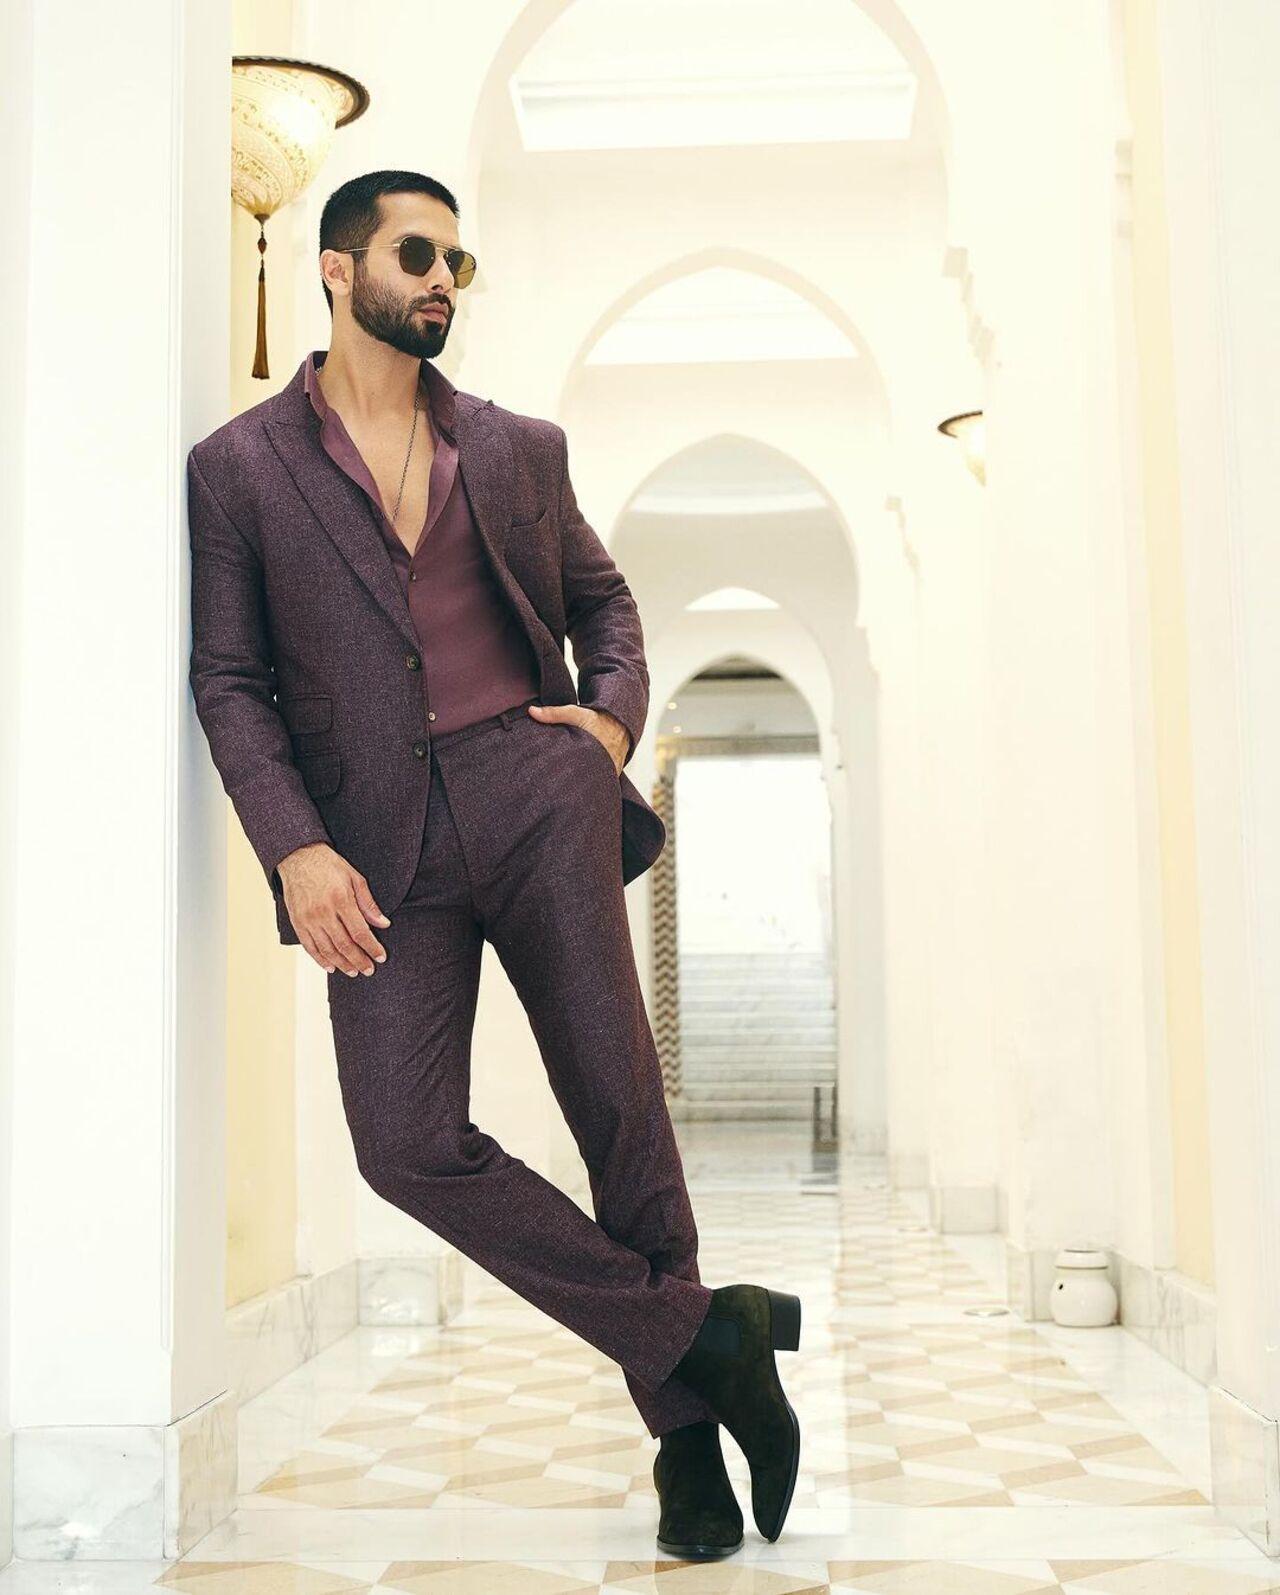 Shahid looks smart in this violet coloured suit making a flattering case for monotone suits